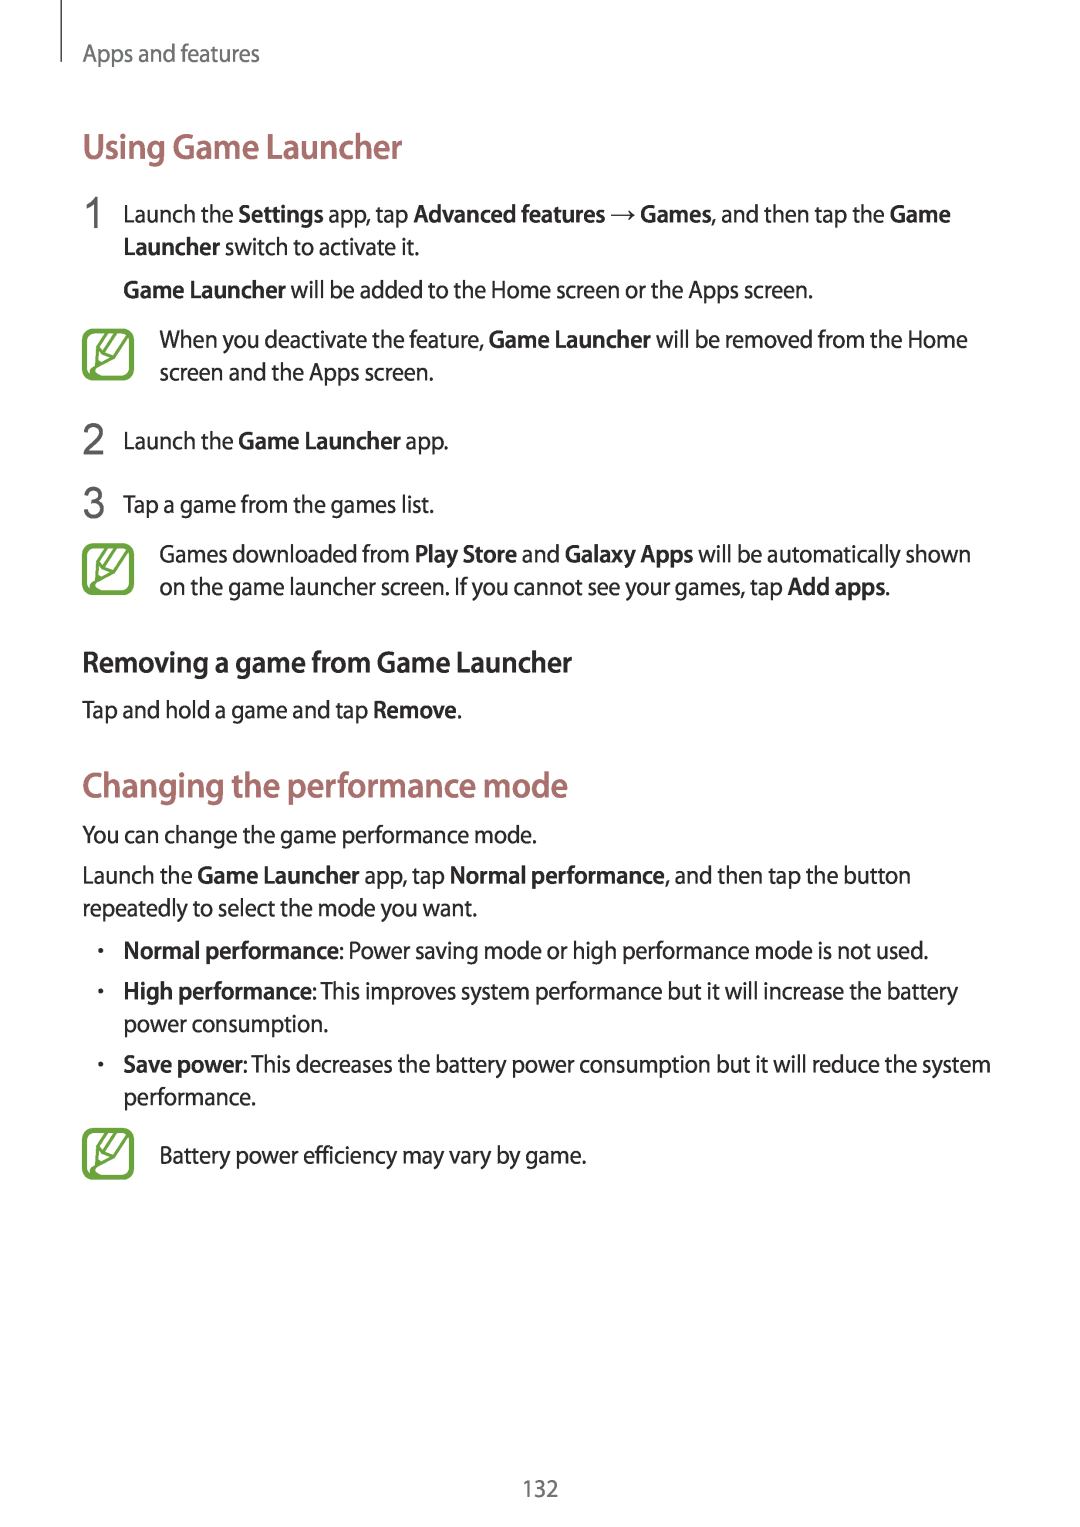 Samsung SM-A530FZDAFTM manual Using Game Launcher, Changing the performance mode, Removing a game from Game Launcher 